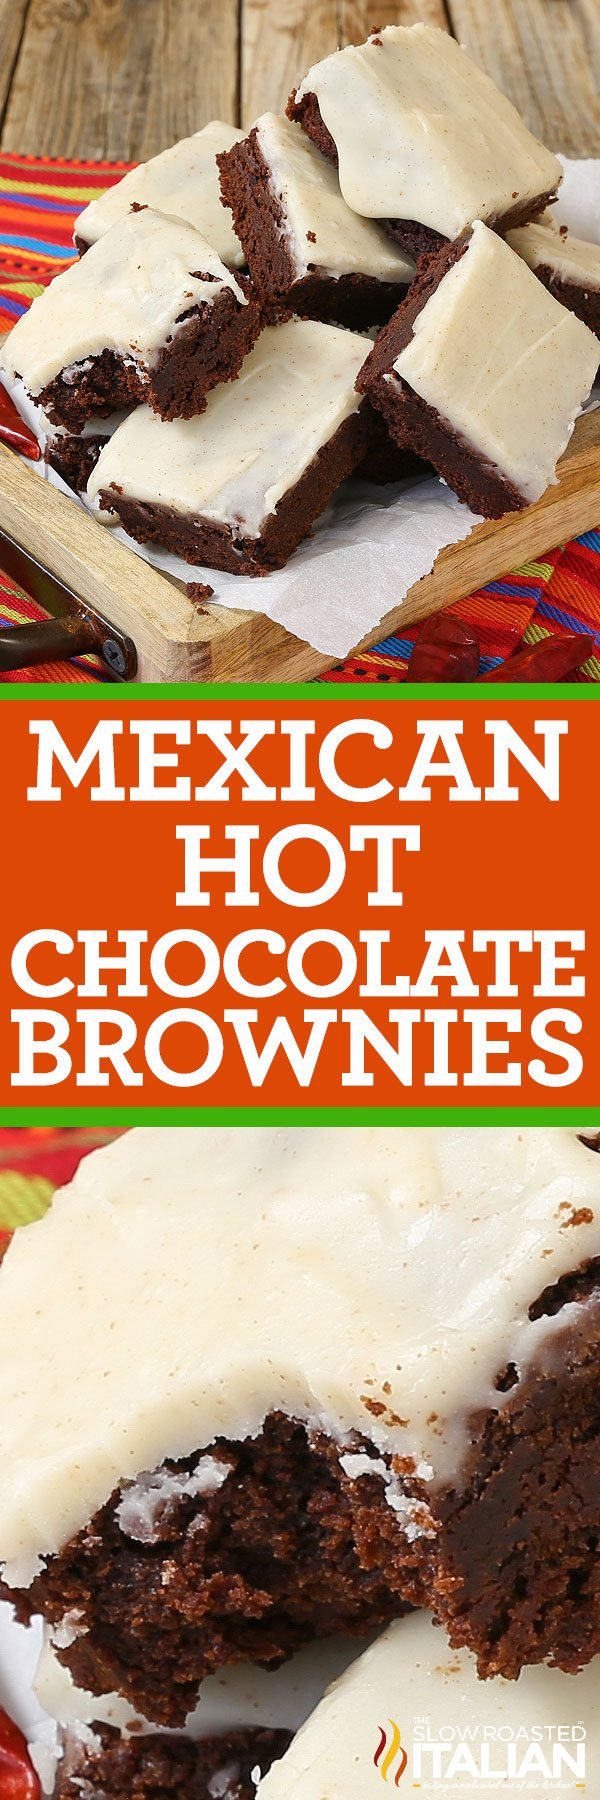 mexican-hot-chocolate-brownies-pin-1352626